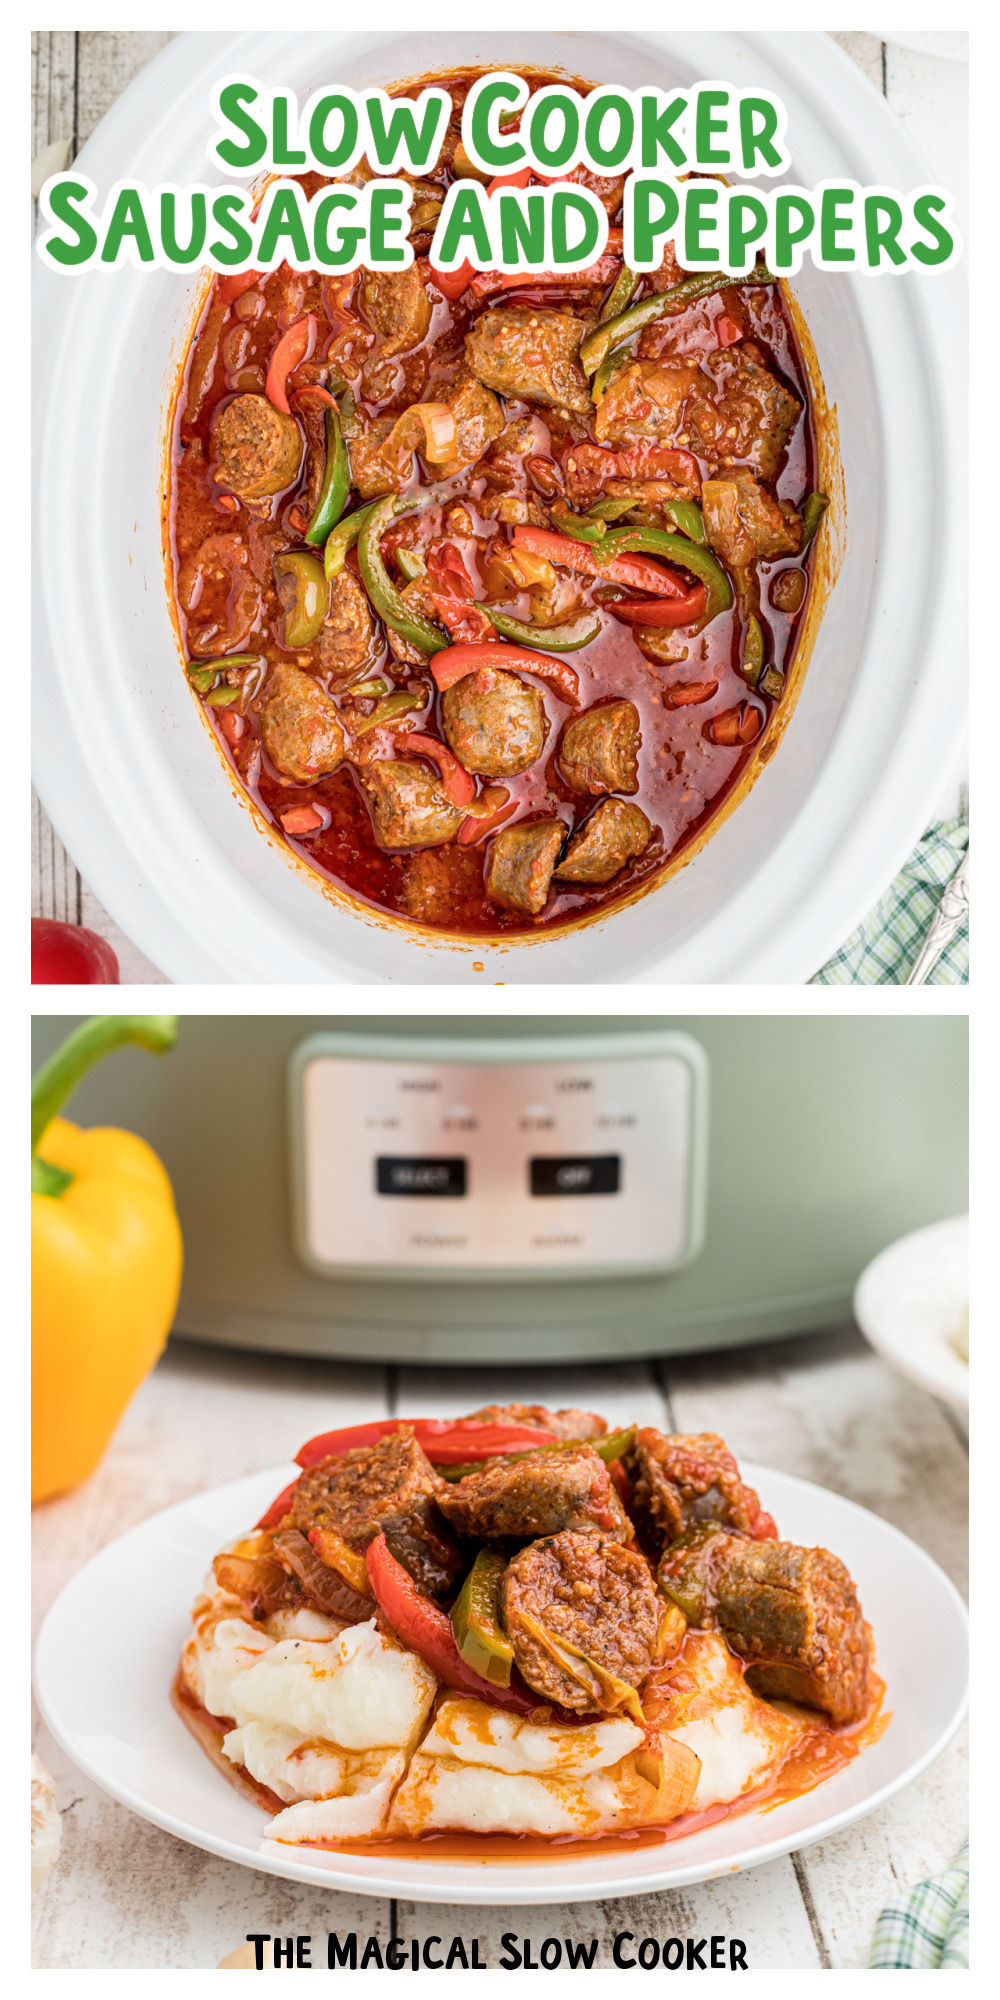 2 images of peppers and sausage in a crockpot.